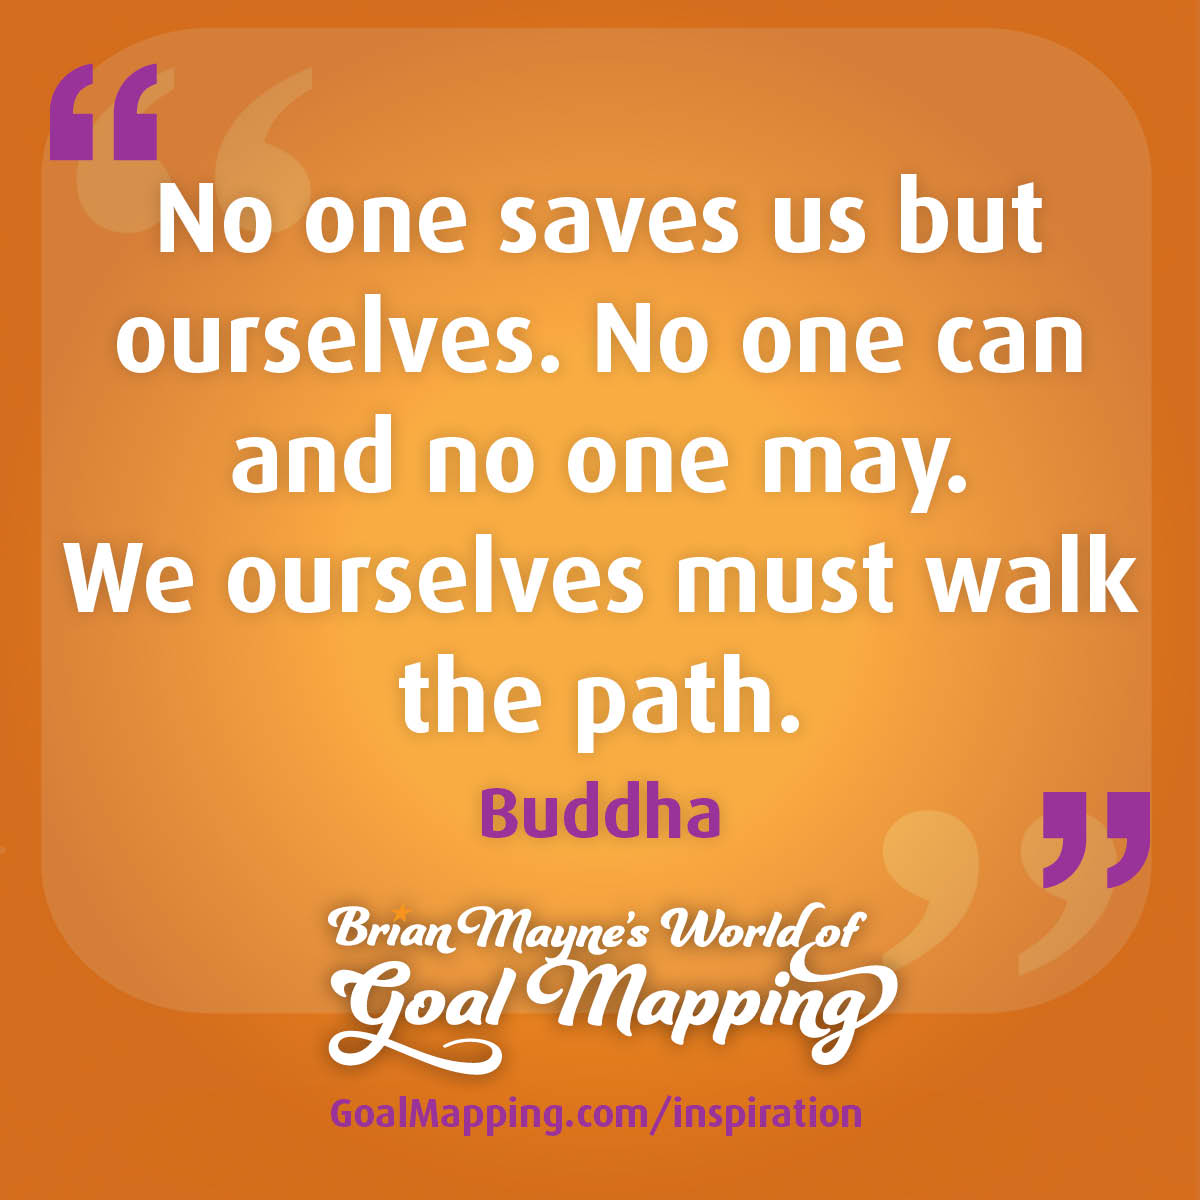 "No one saves us but ourselves. No one can and no one may. We ourselves must walk the path." Buddha